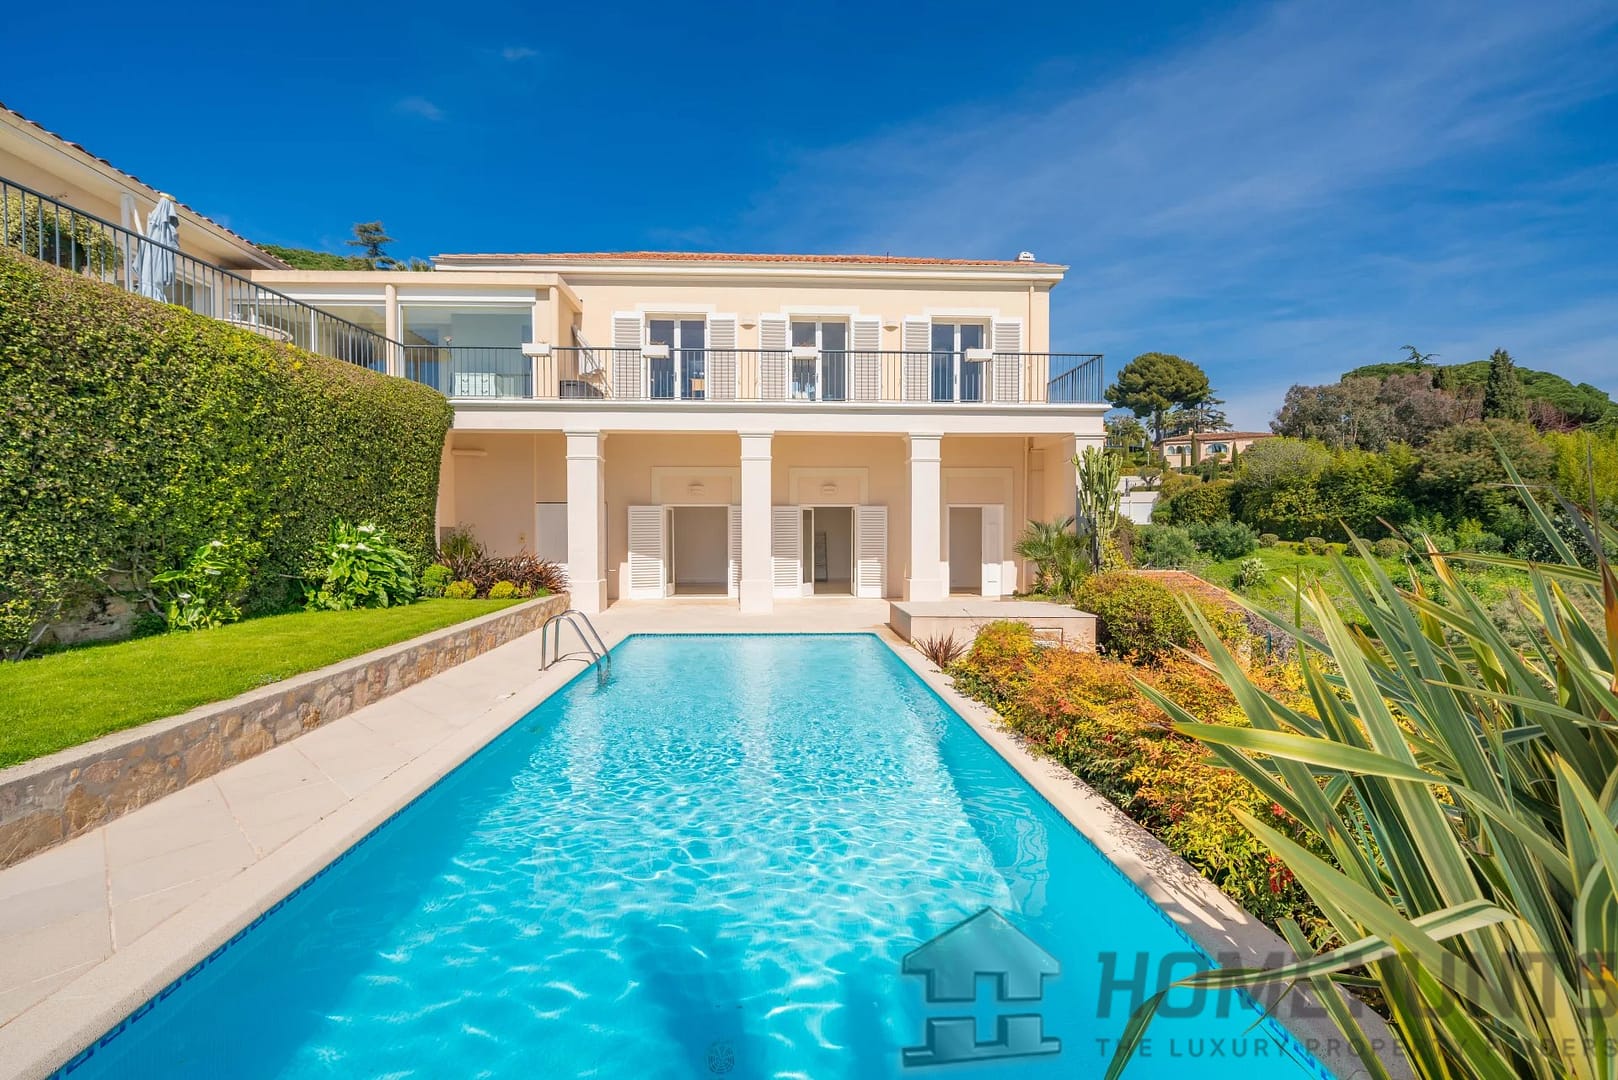 4 Bedroom Villa/House in Cannes 17